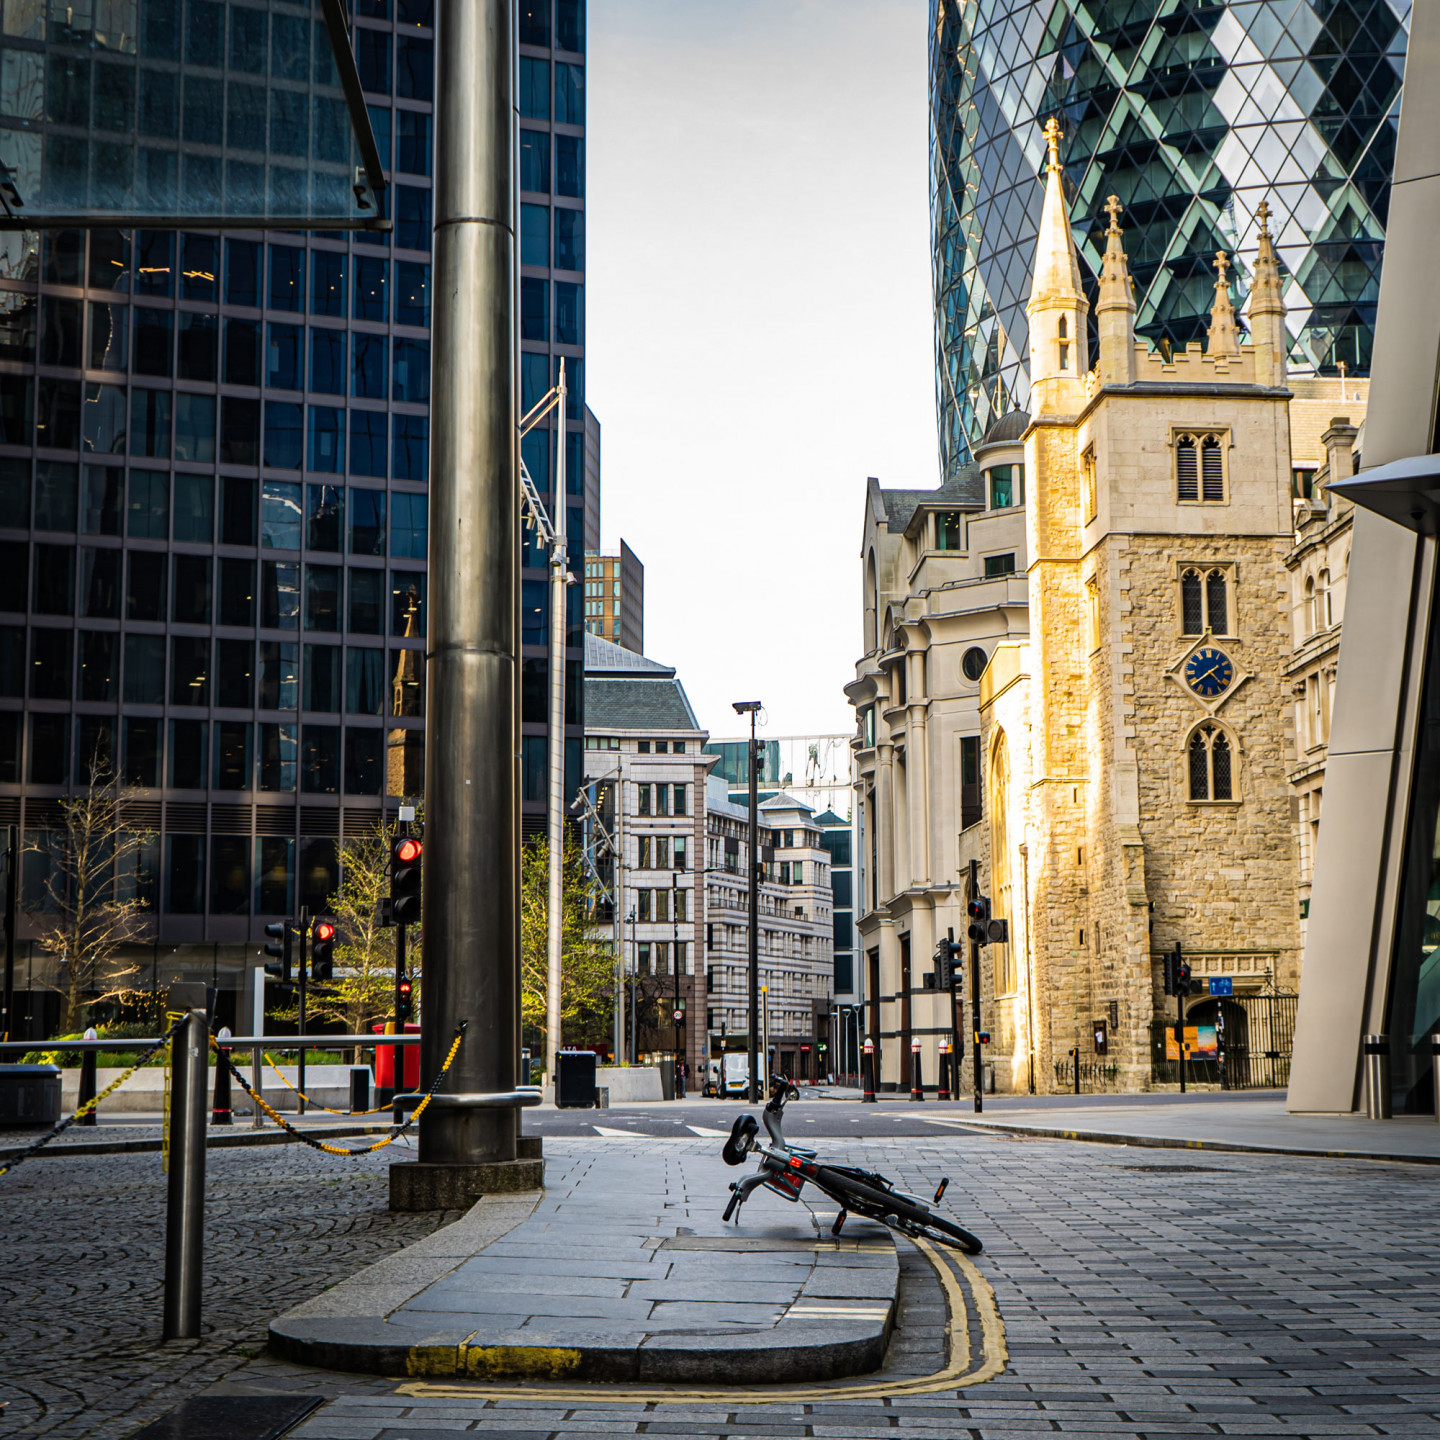 Deserted streets around the Gherkin during rush hour, London, May. © Richard Lawrence